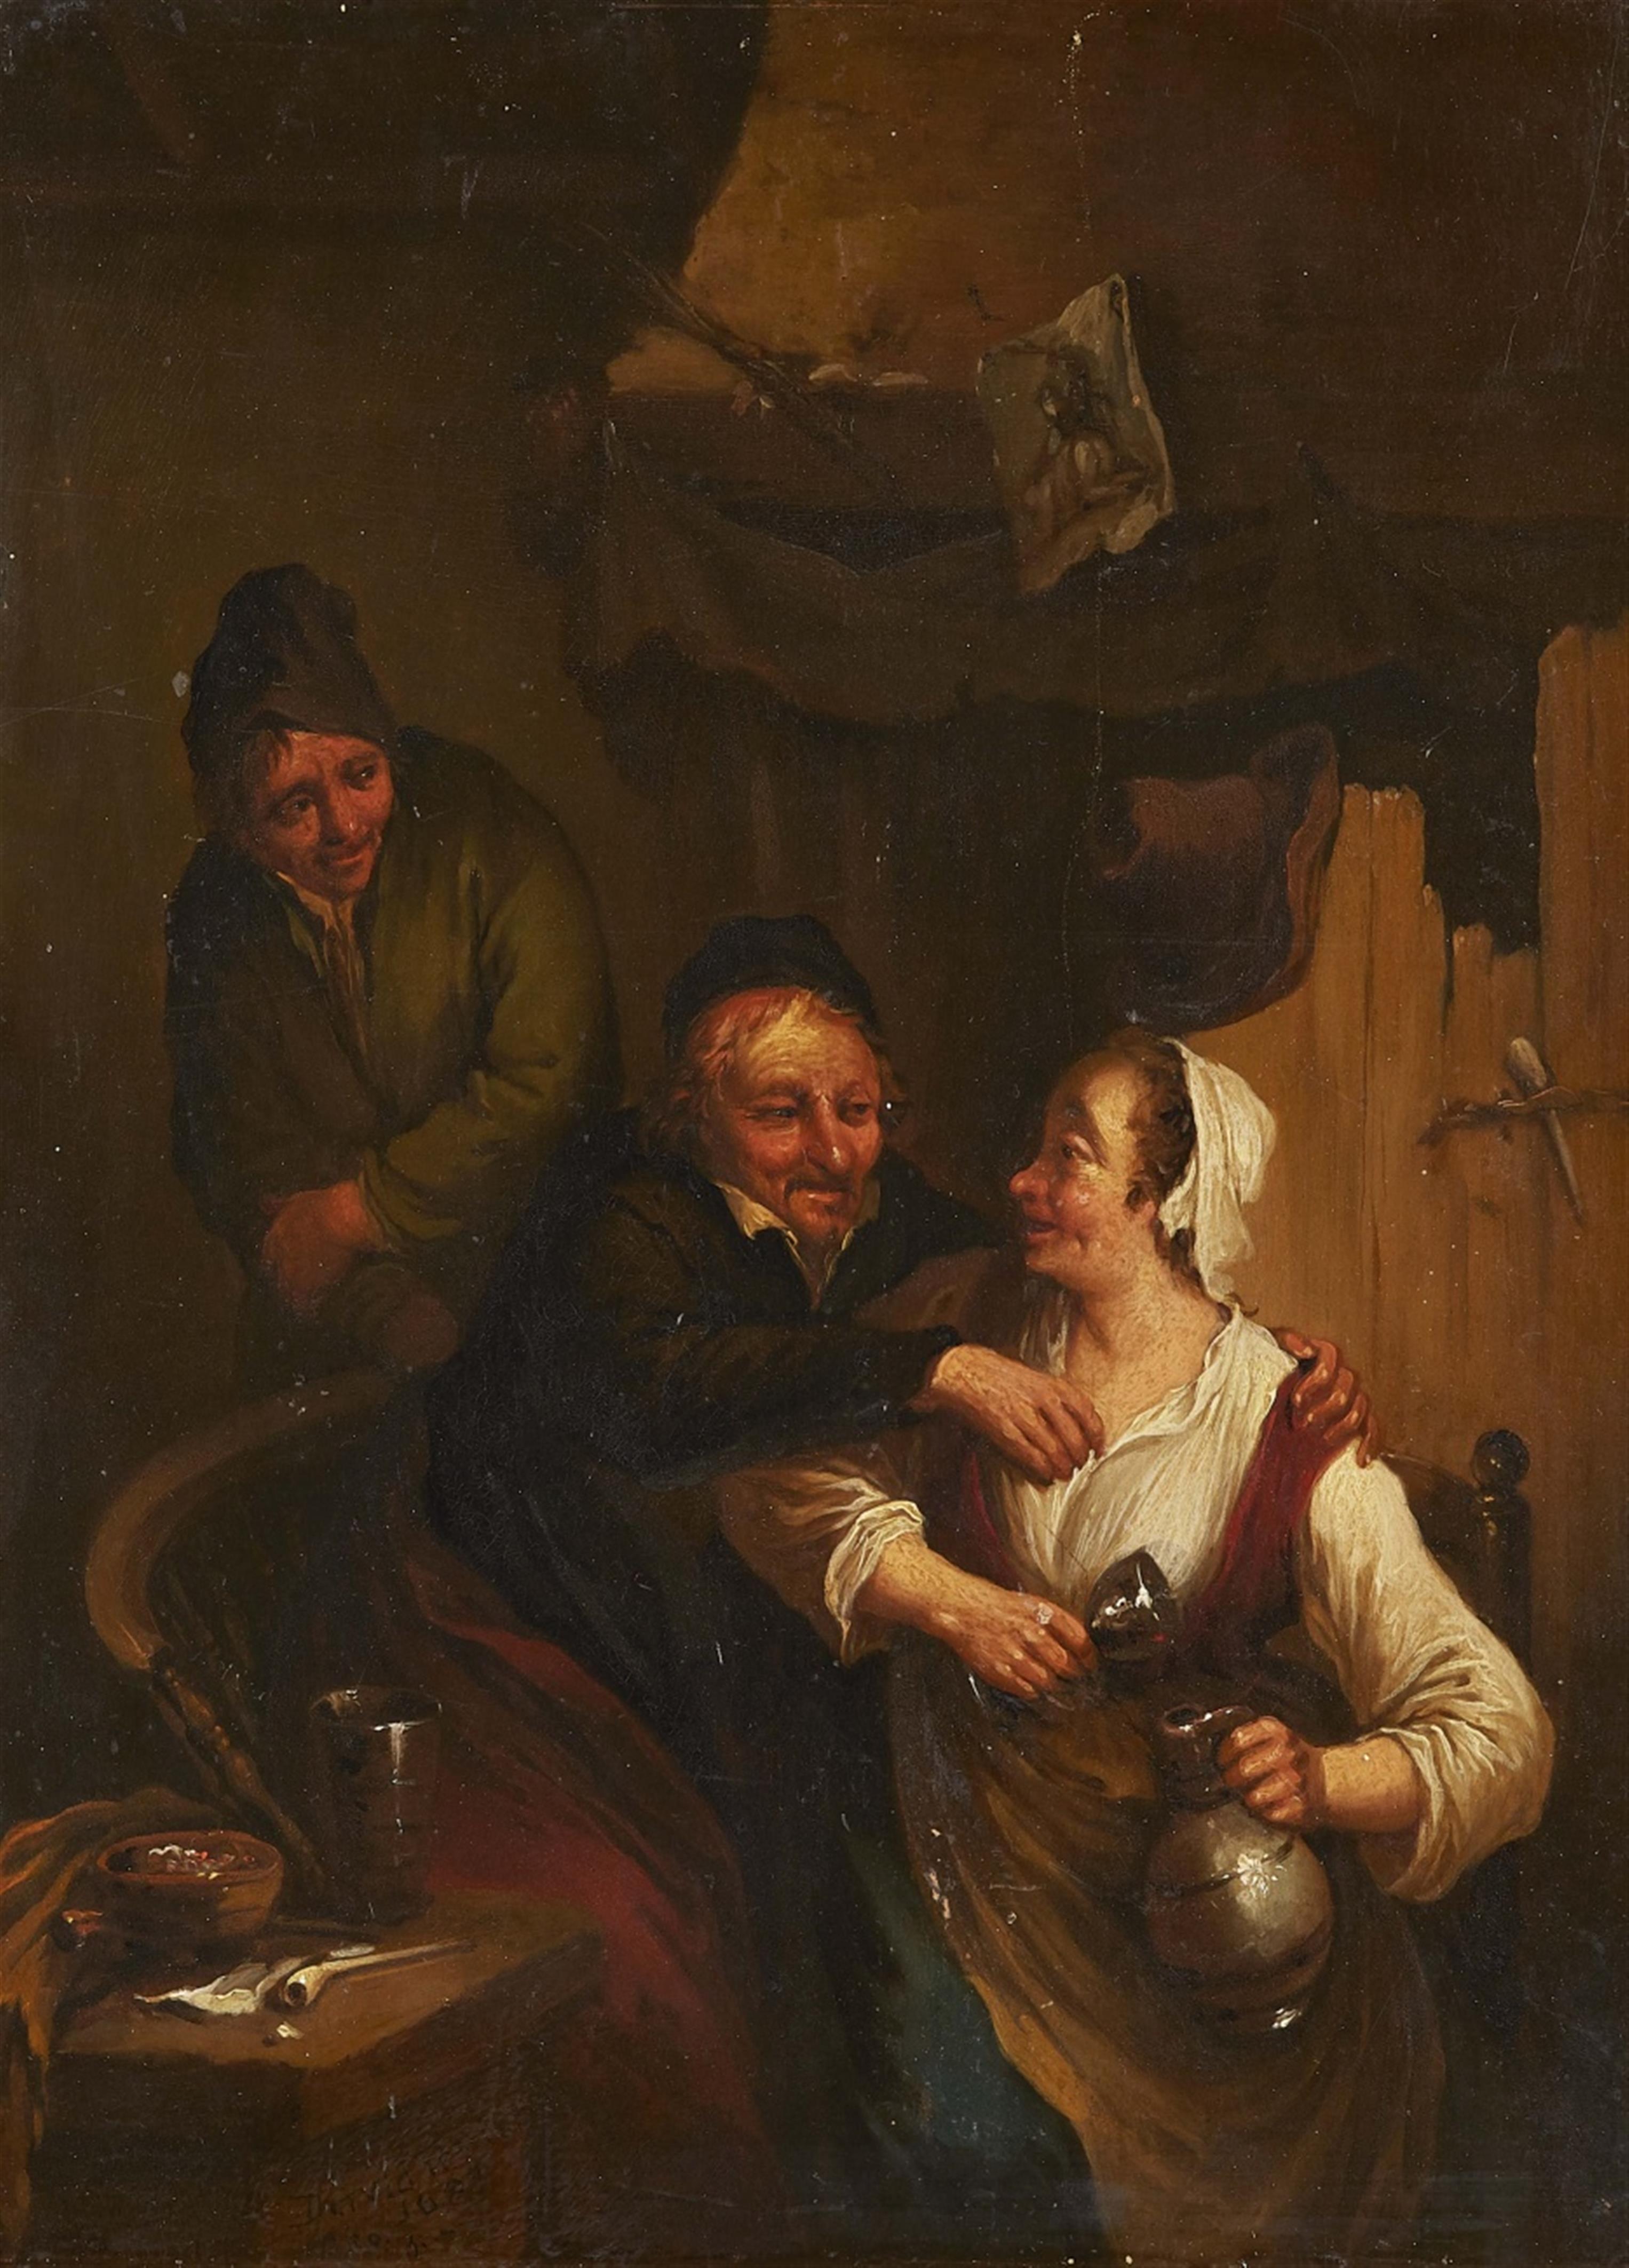 Netherlandish School 17th century - Ill-Matched Couple in a Tavern - image-1